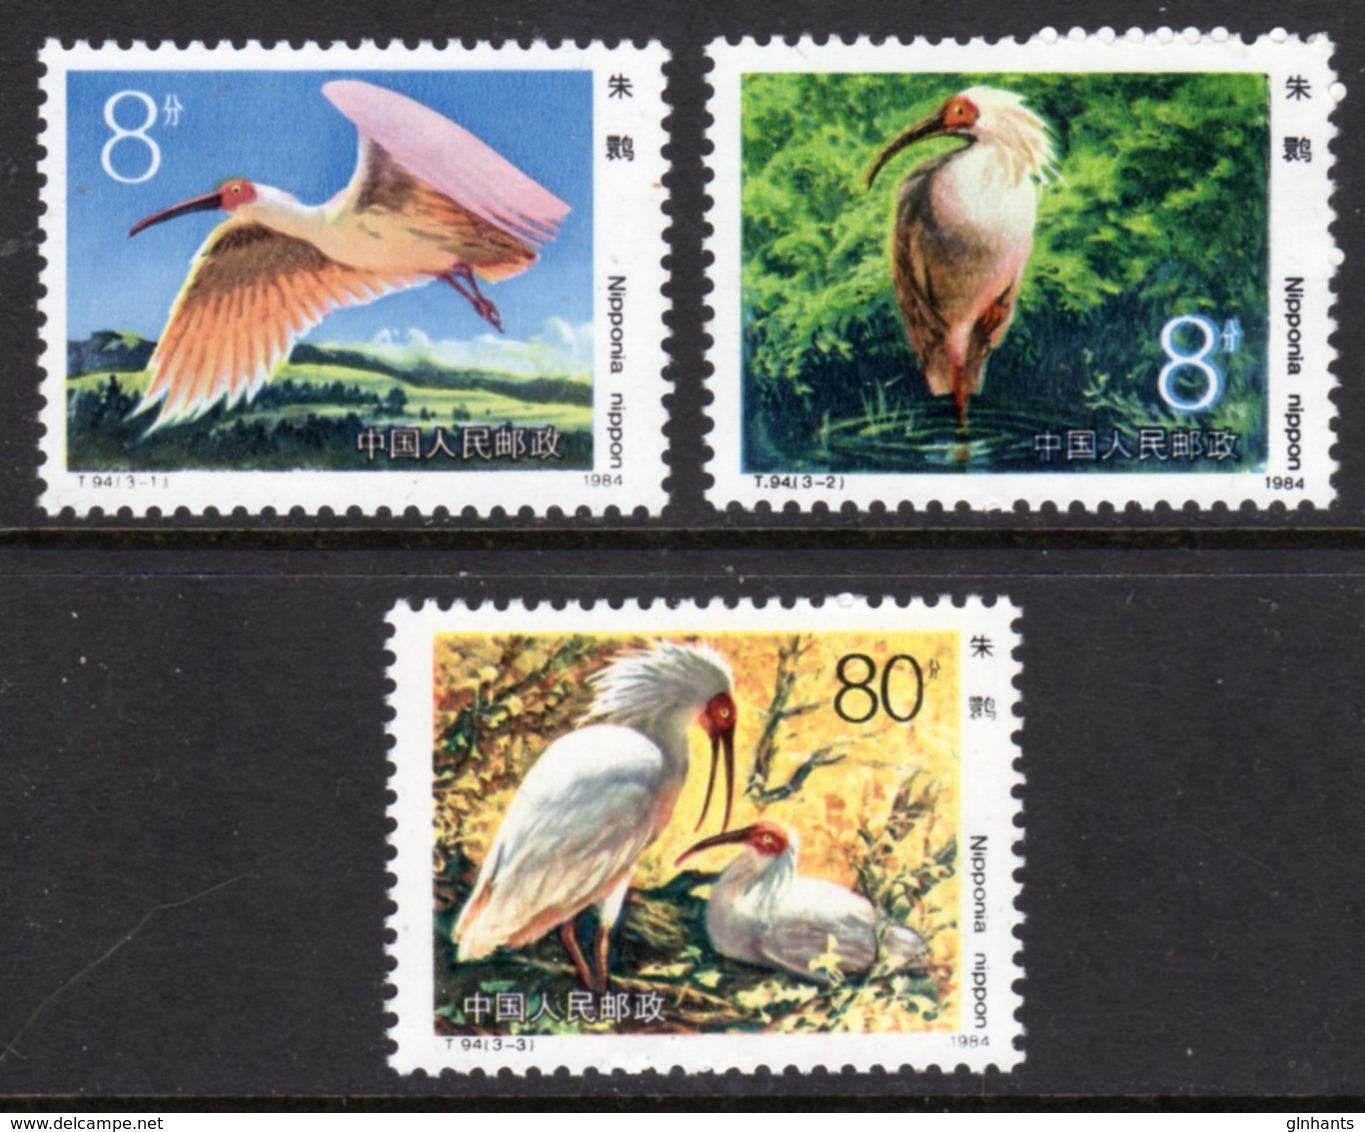 CHINA PEOPLE'S REPUBLIC - 1984 JAPANESE CRESTED IBIS BIRDS SET (3V) FINE MNH ** SG 3311-3313 - Used Stamps